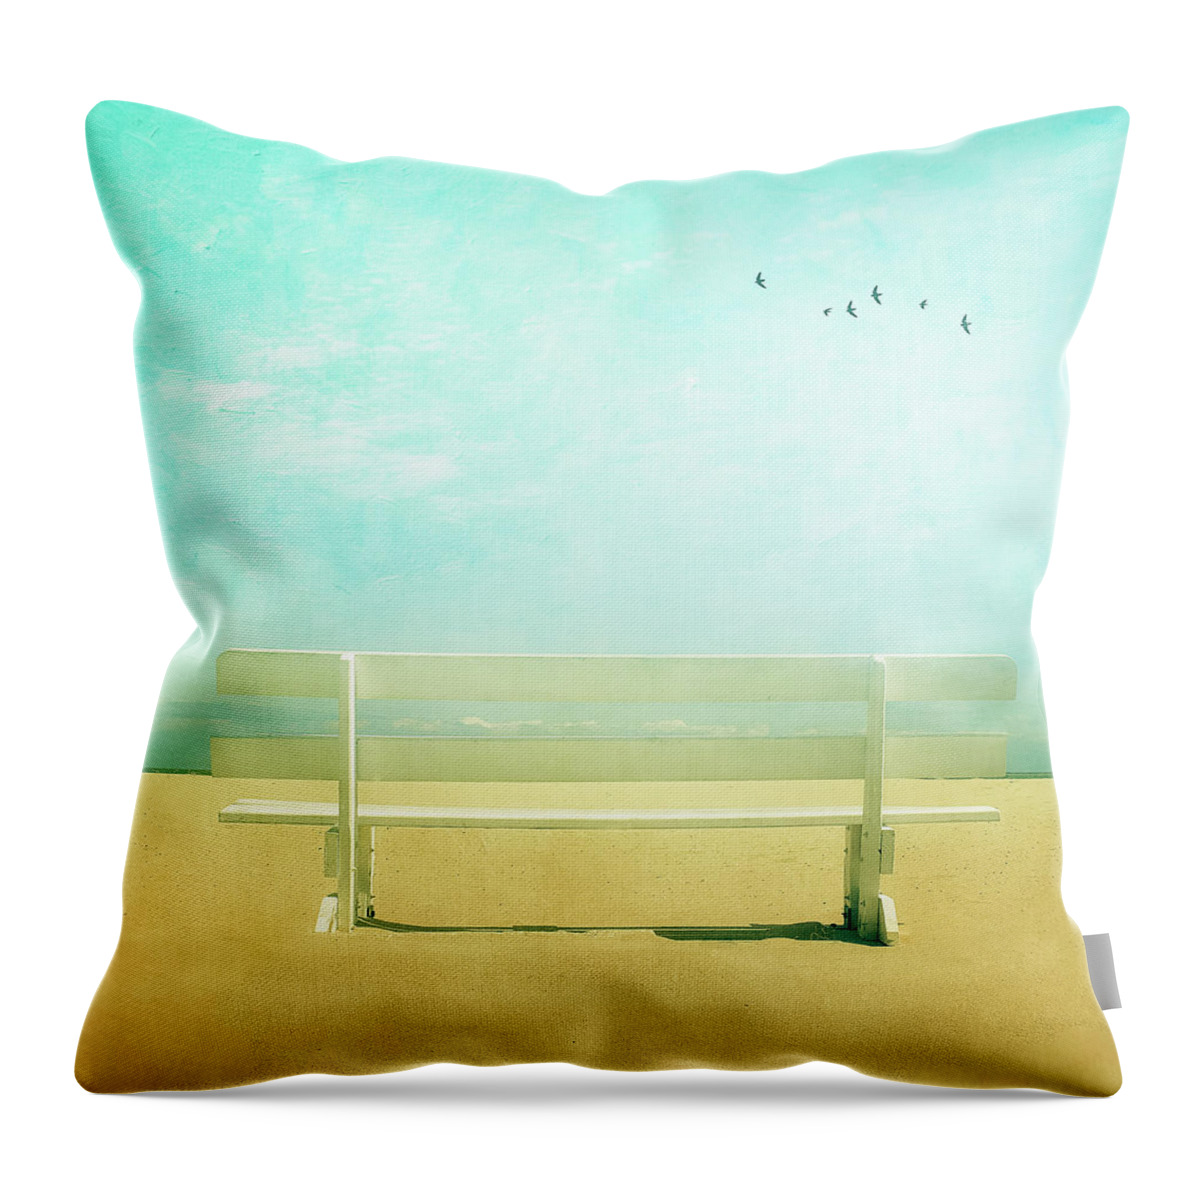 Tranquility Throw Pillow featuring the photograph Bench With Clouds And Birds by Diana Kehoe Photography